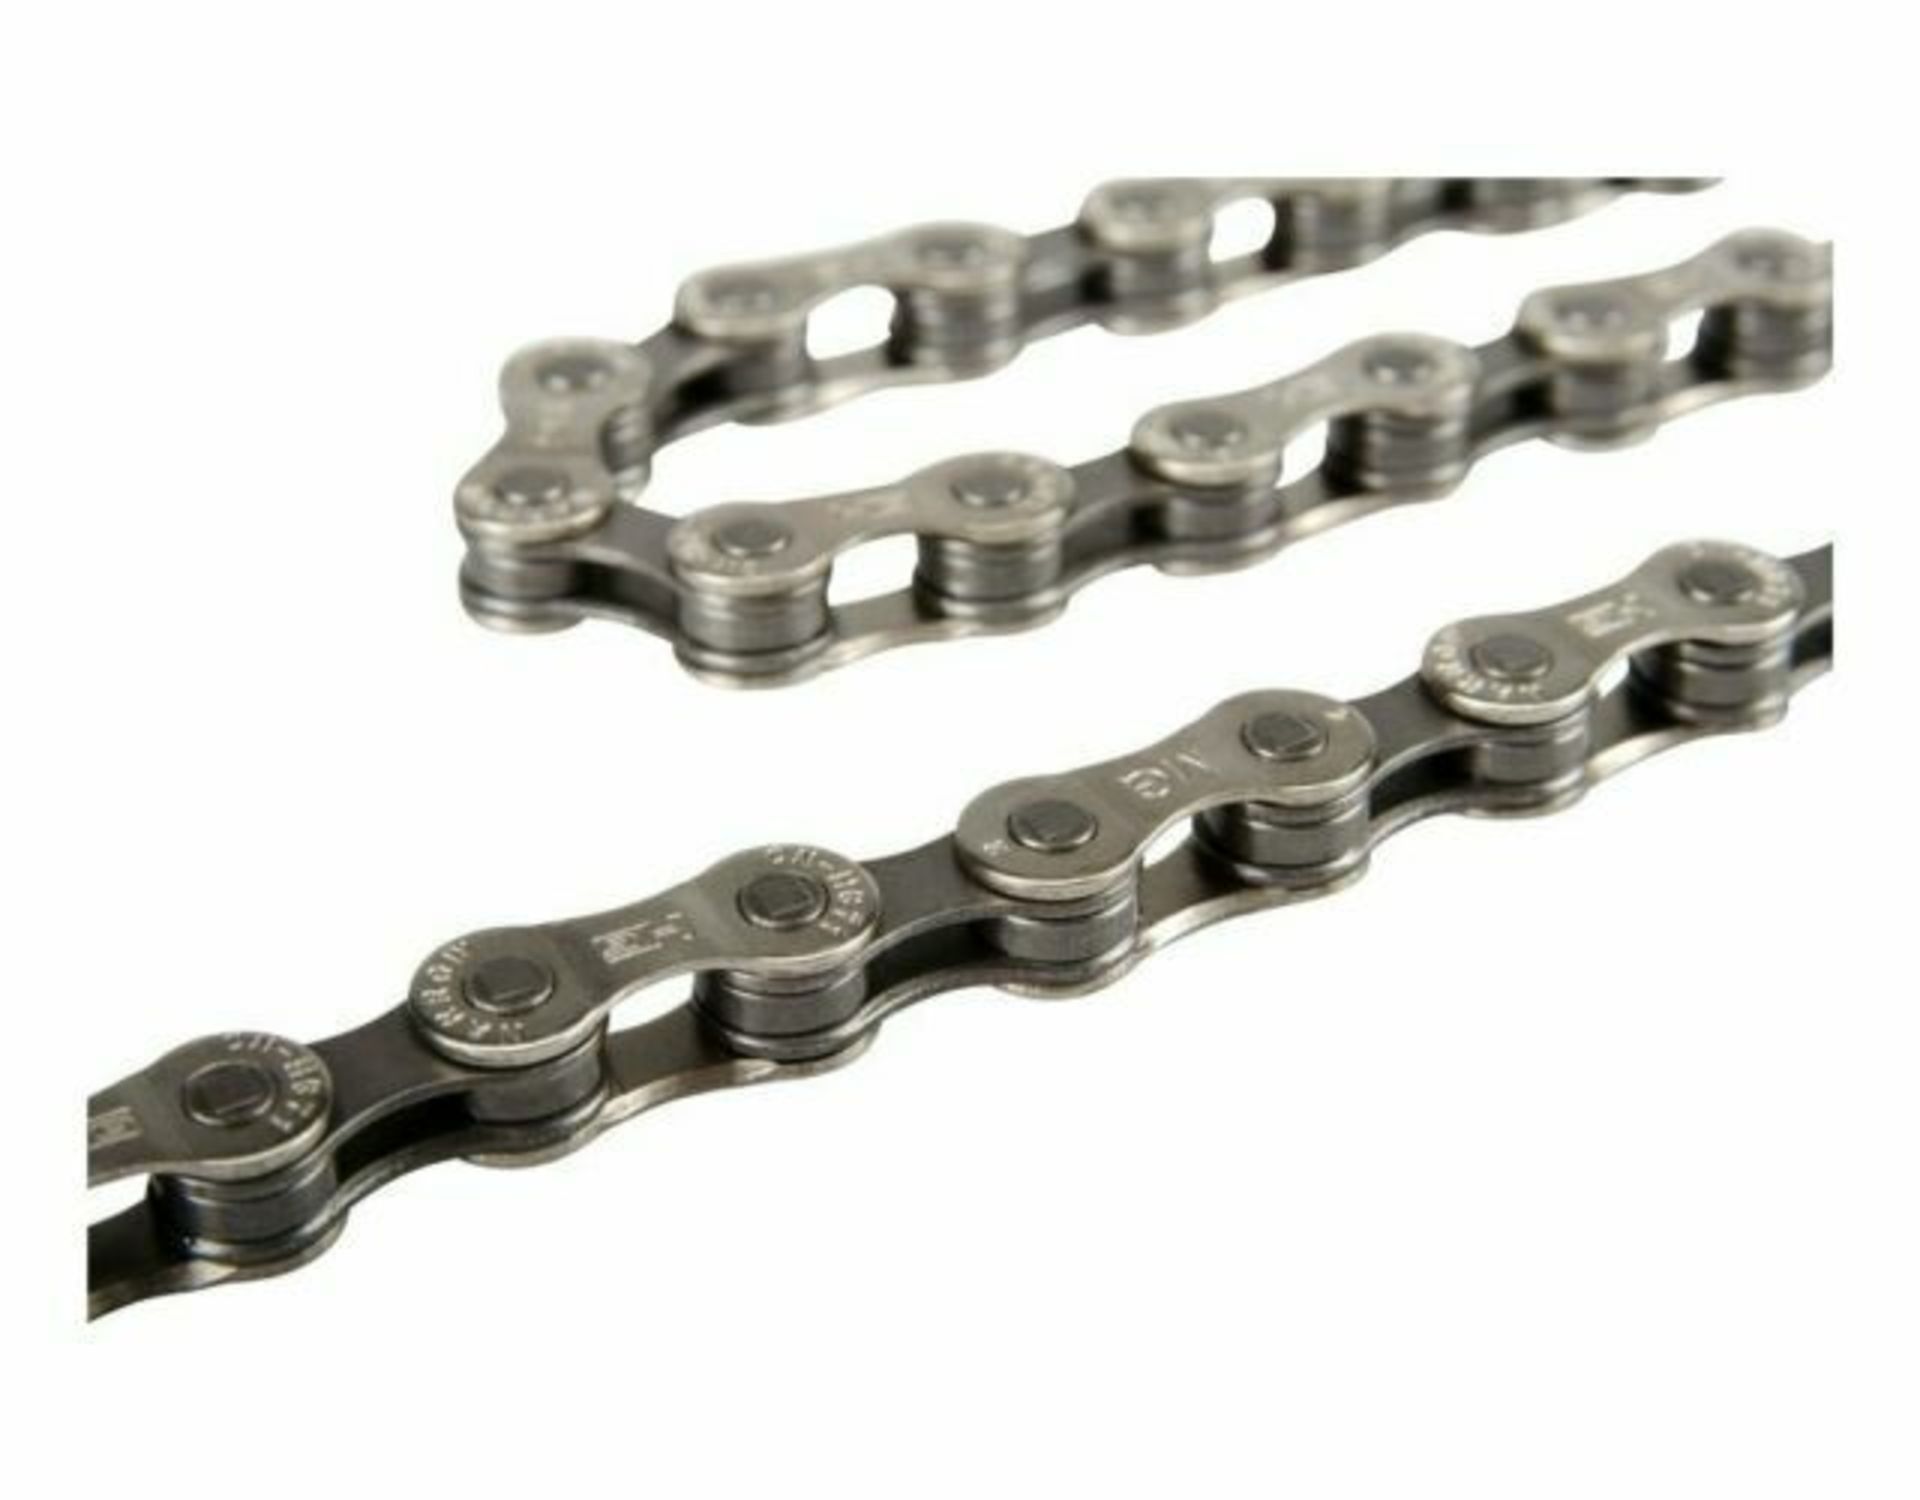 4 x Shimano CN-HG71 Chains - 6, 7, 8-Speed, 116 Links